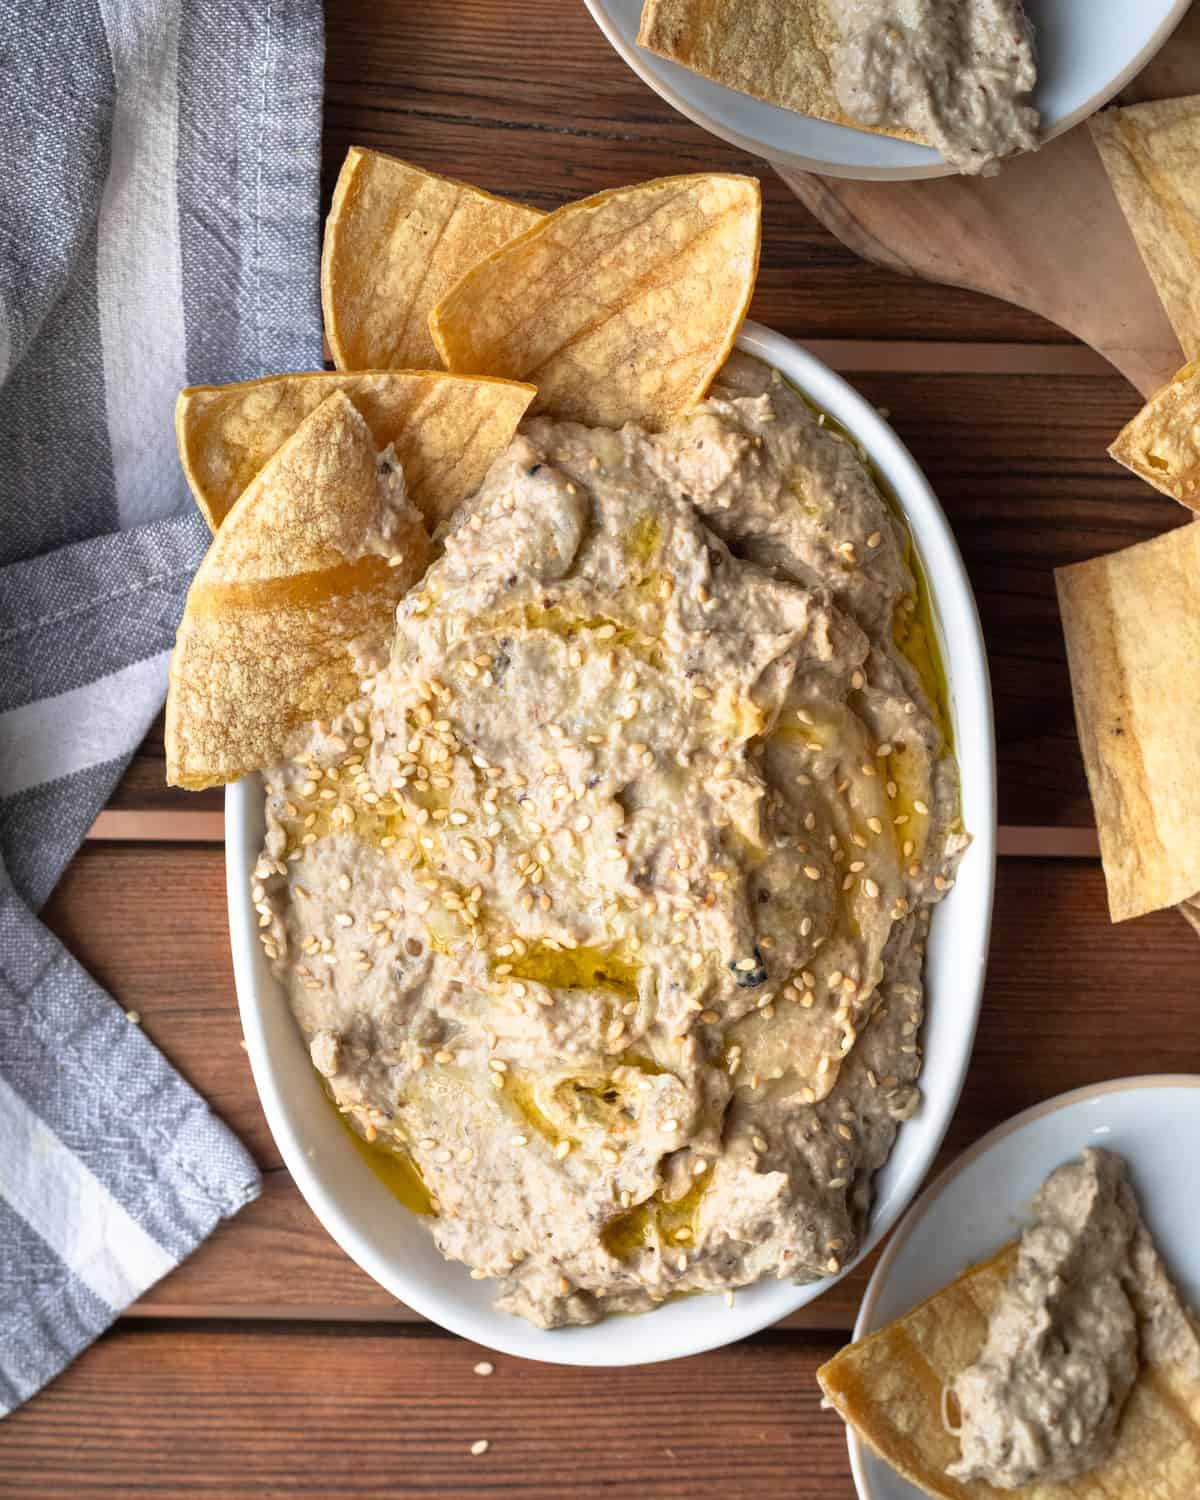 Overhead shot of eggplant tahini dip served in a white bowl, topped with sesame seeds and olive oil, with pita chips on the side, all set on a wooden surface.